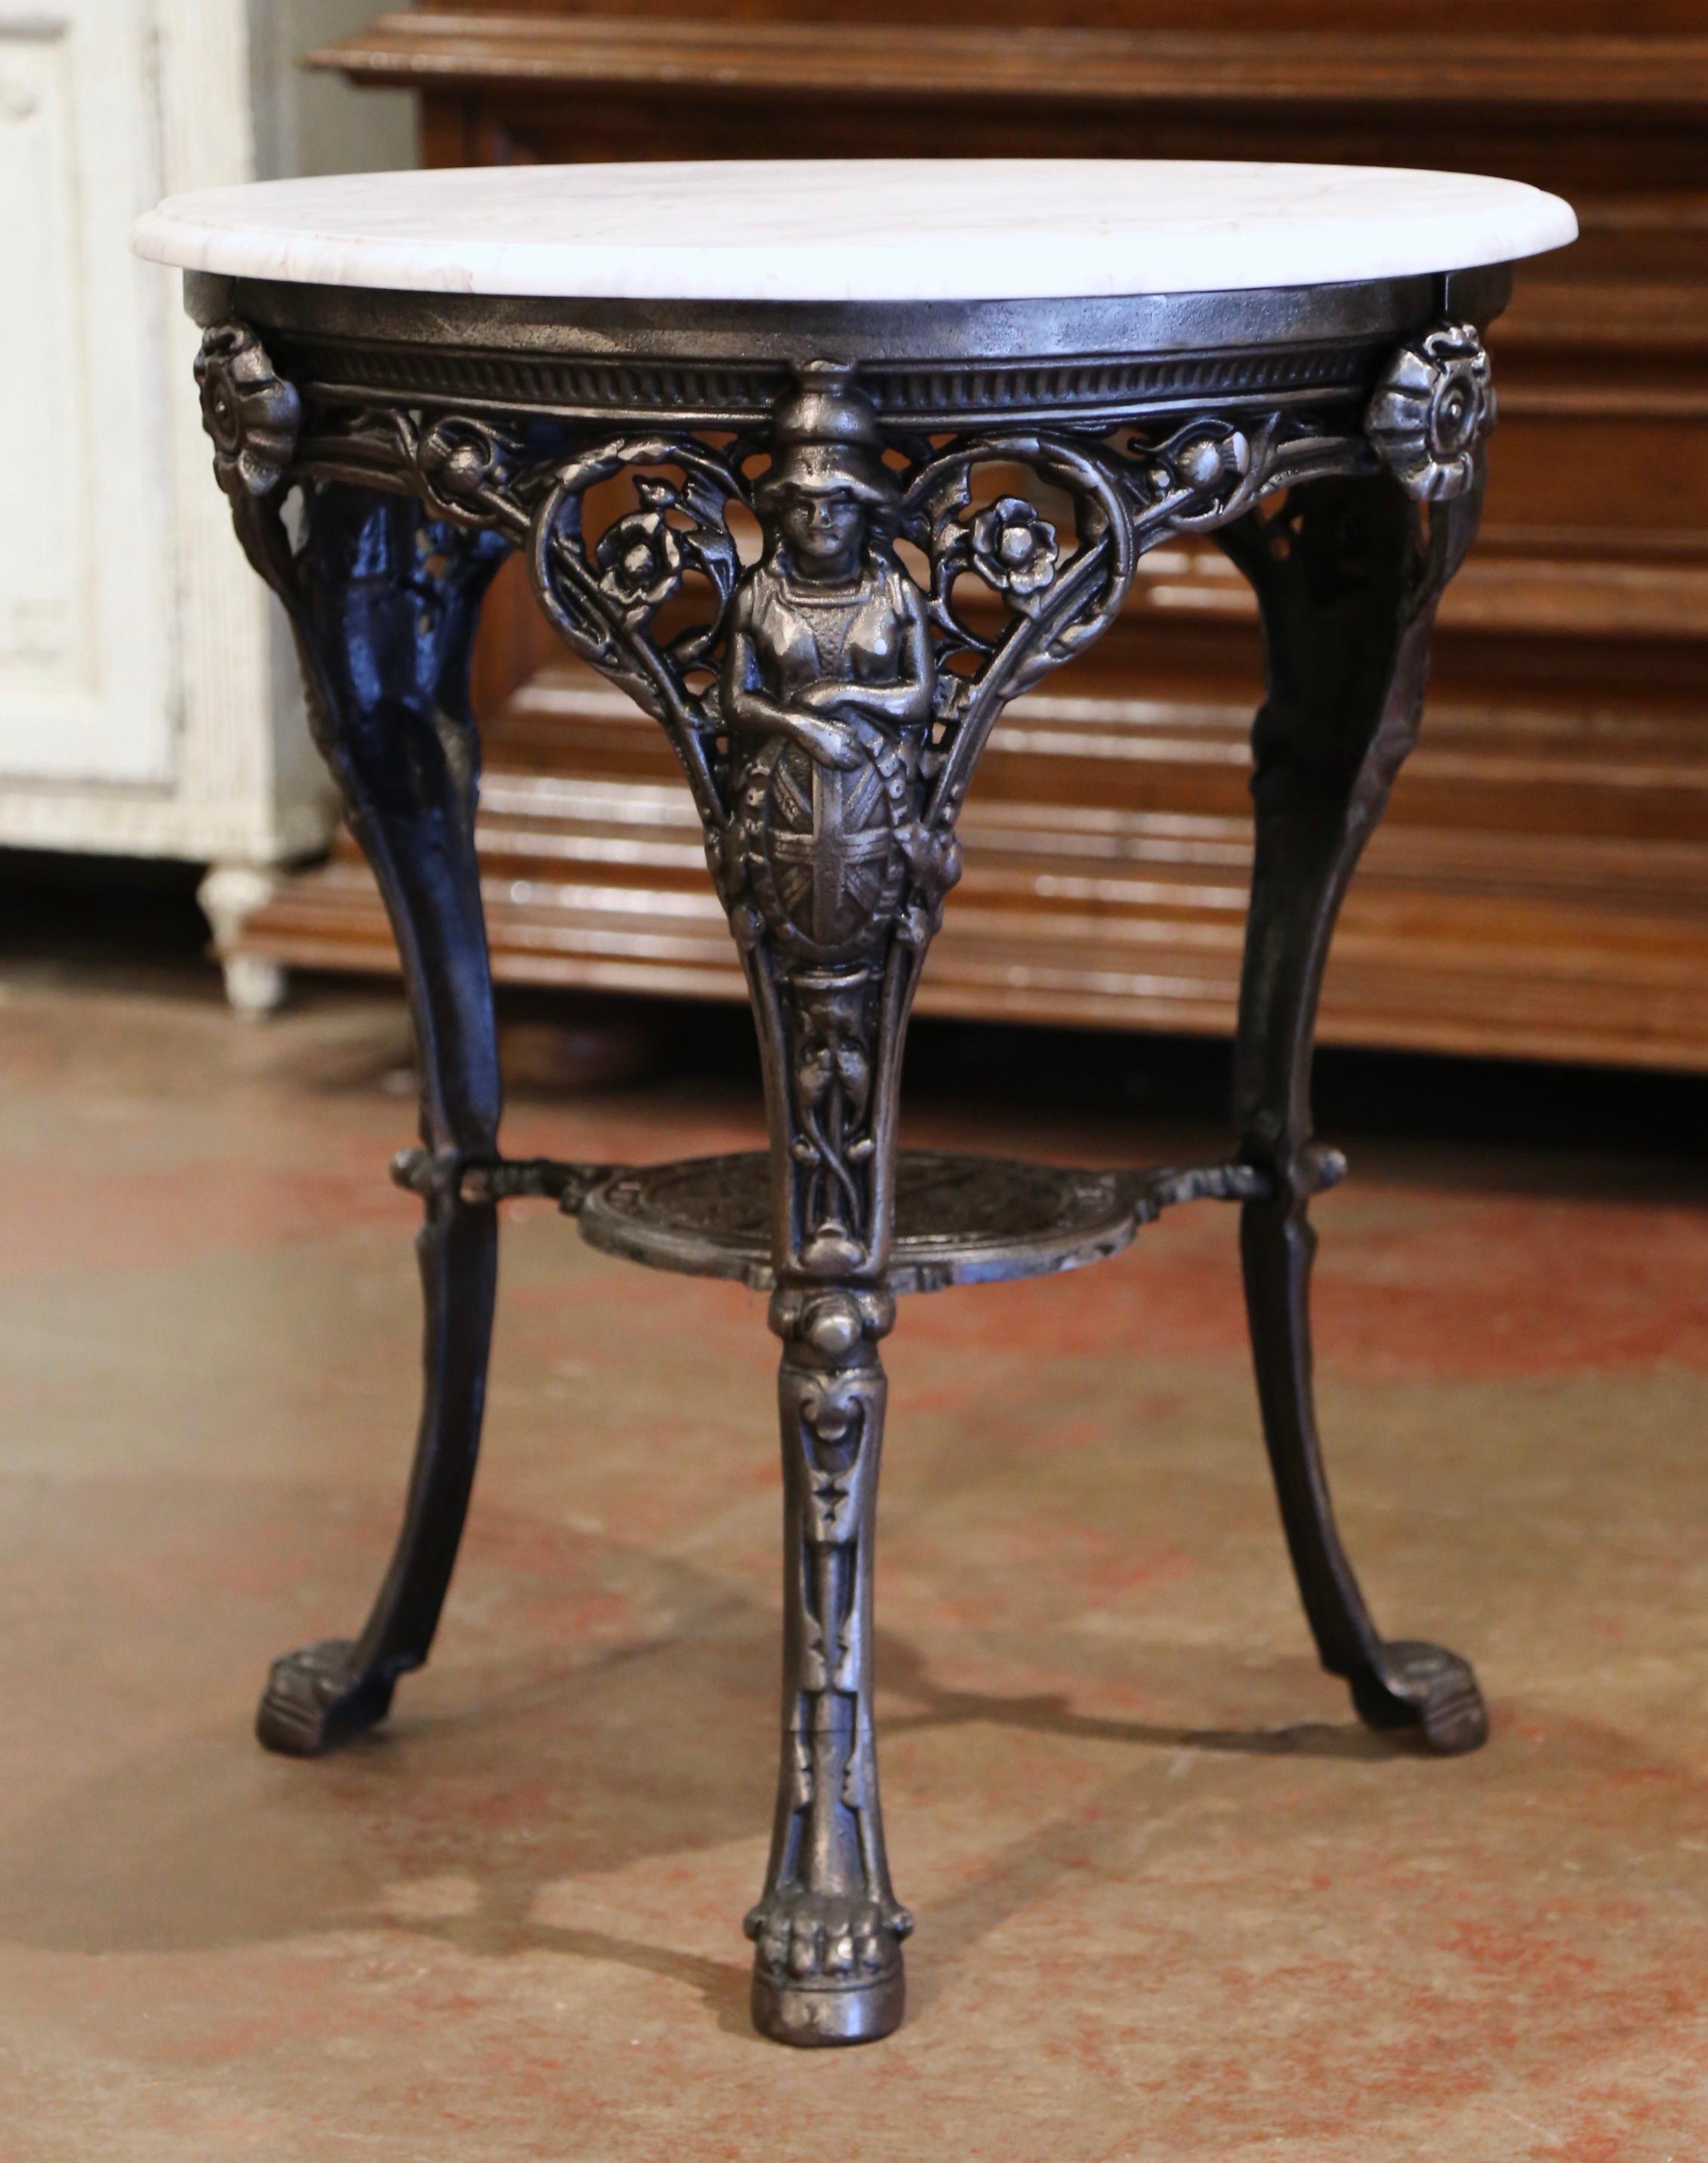 Decorate a patio or sun room with this elegant antique three-leg gueridon. Crafted in England circa 1880, the pub table stands on three cabriole legs with female figures at the shoulder and ending with paw feet; the legs are joined together with a